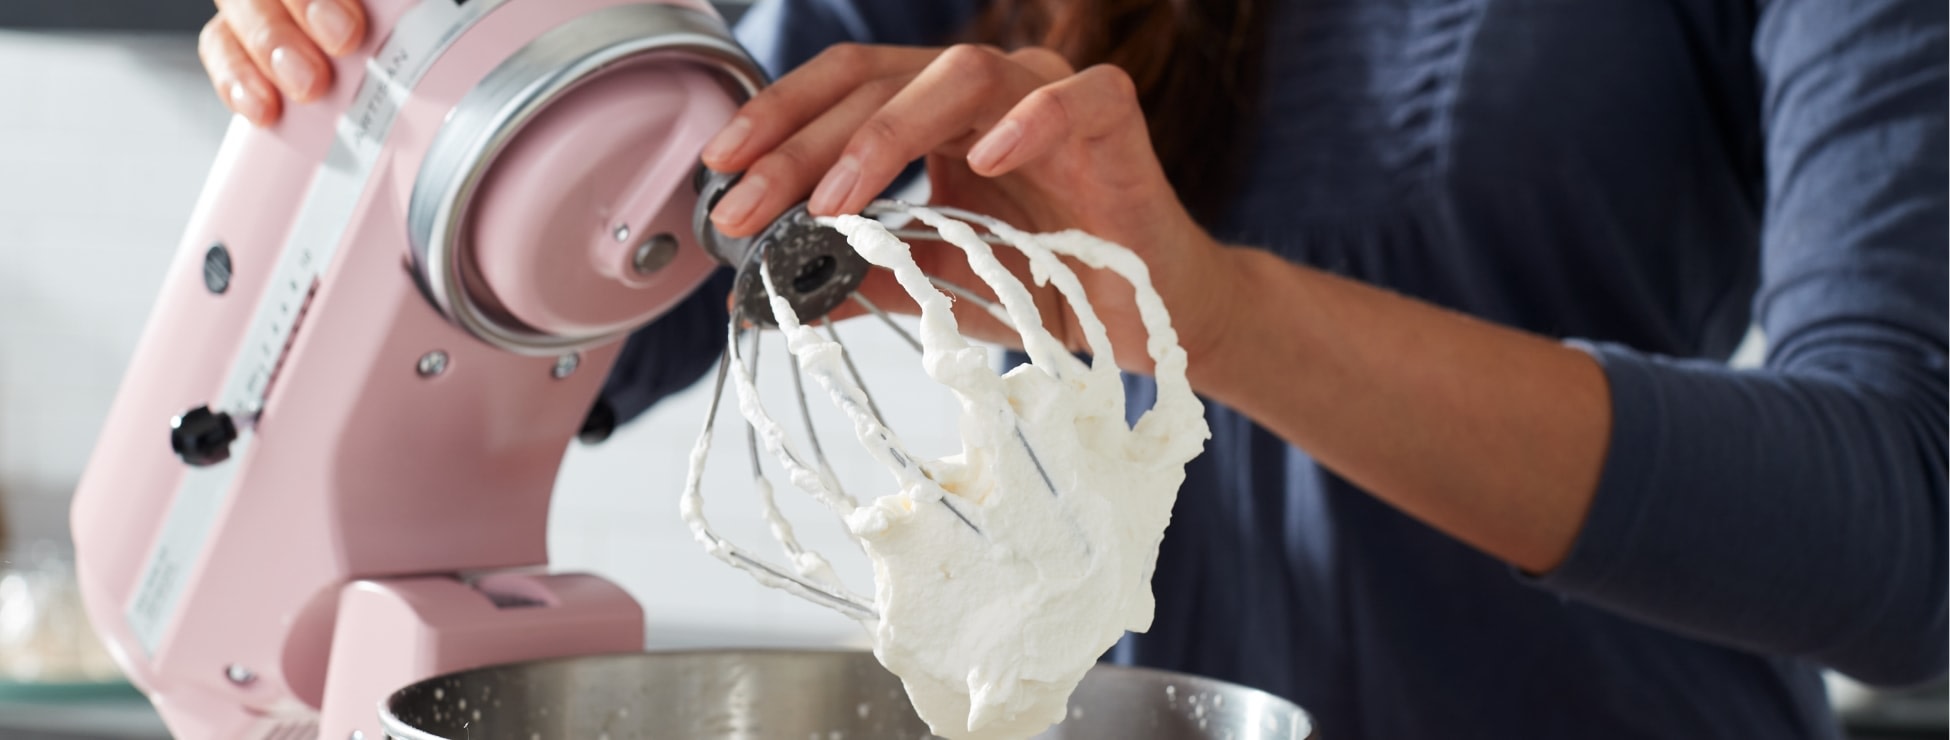 Whisk-mix-and-knead-with-mixer-parts